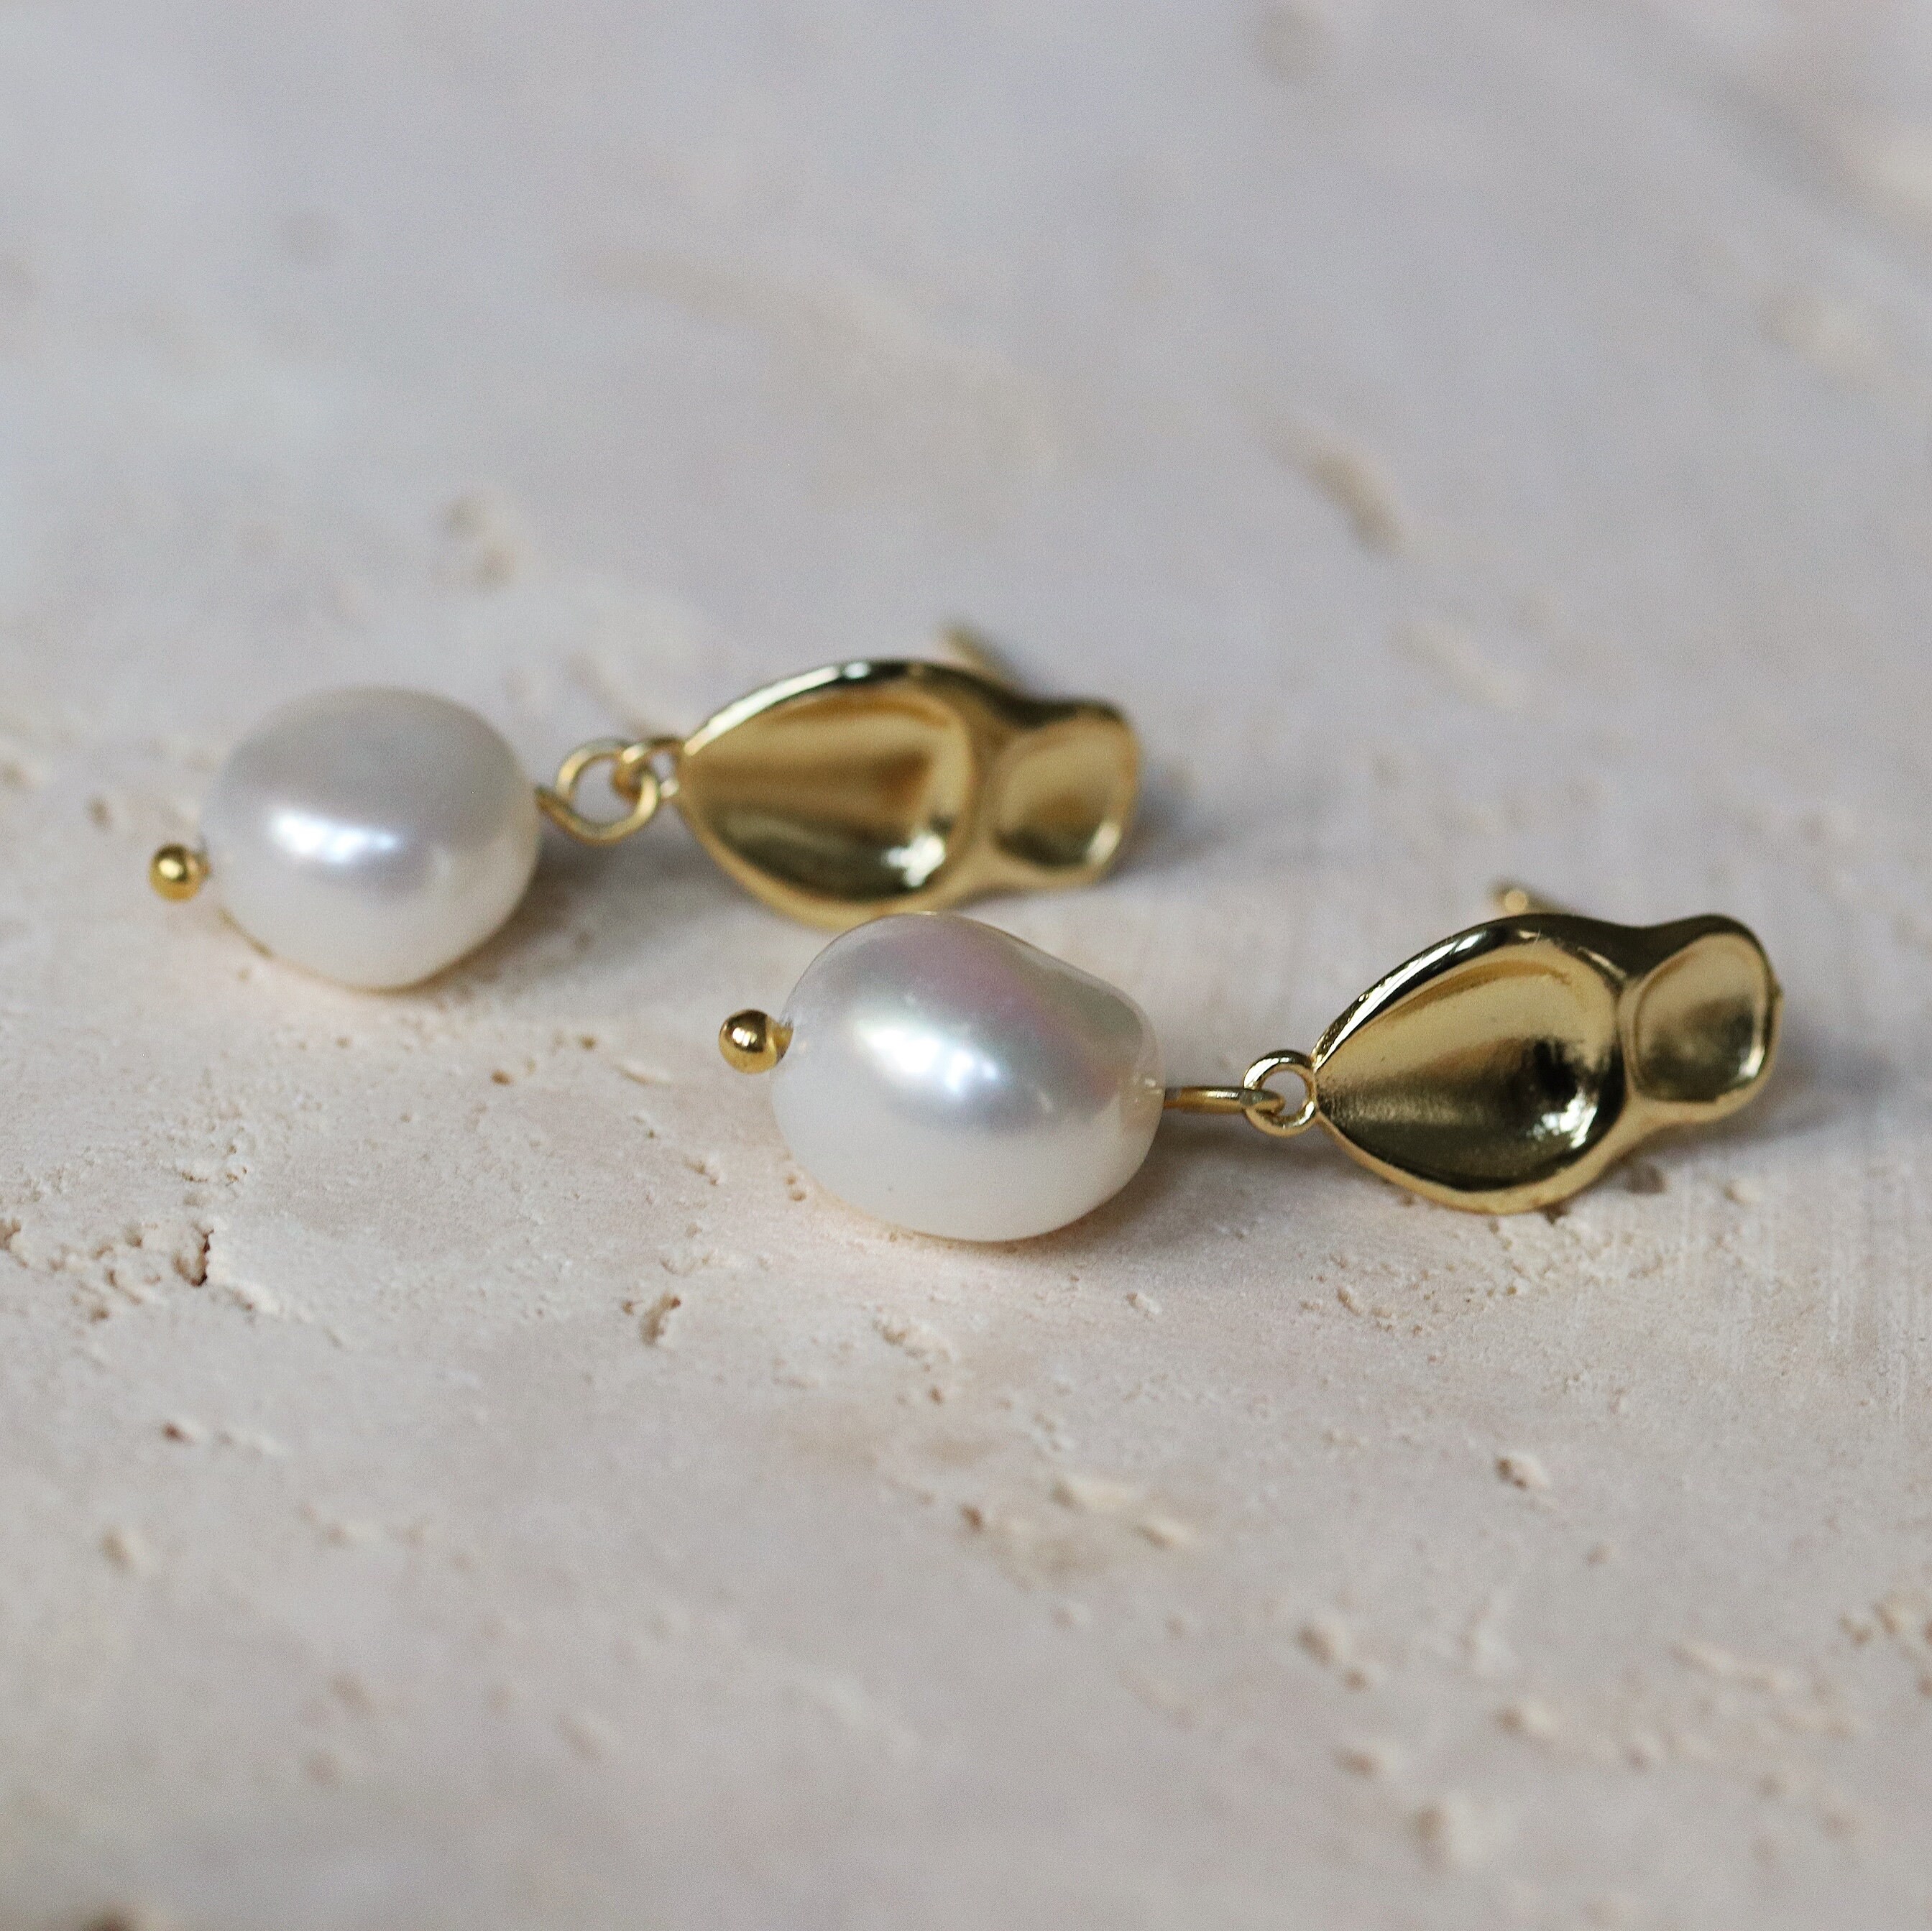 Baroque Triomphe Earrings in Brass with Gold Finish and Cultured Pearls